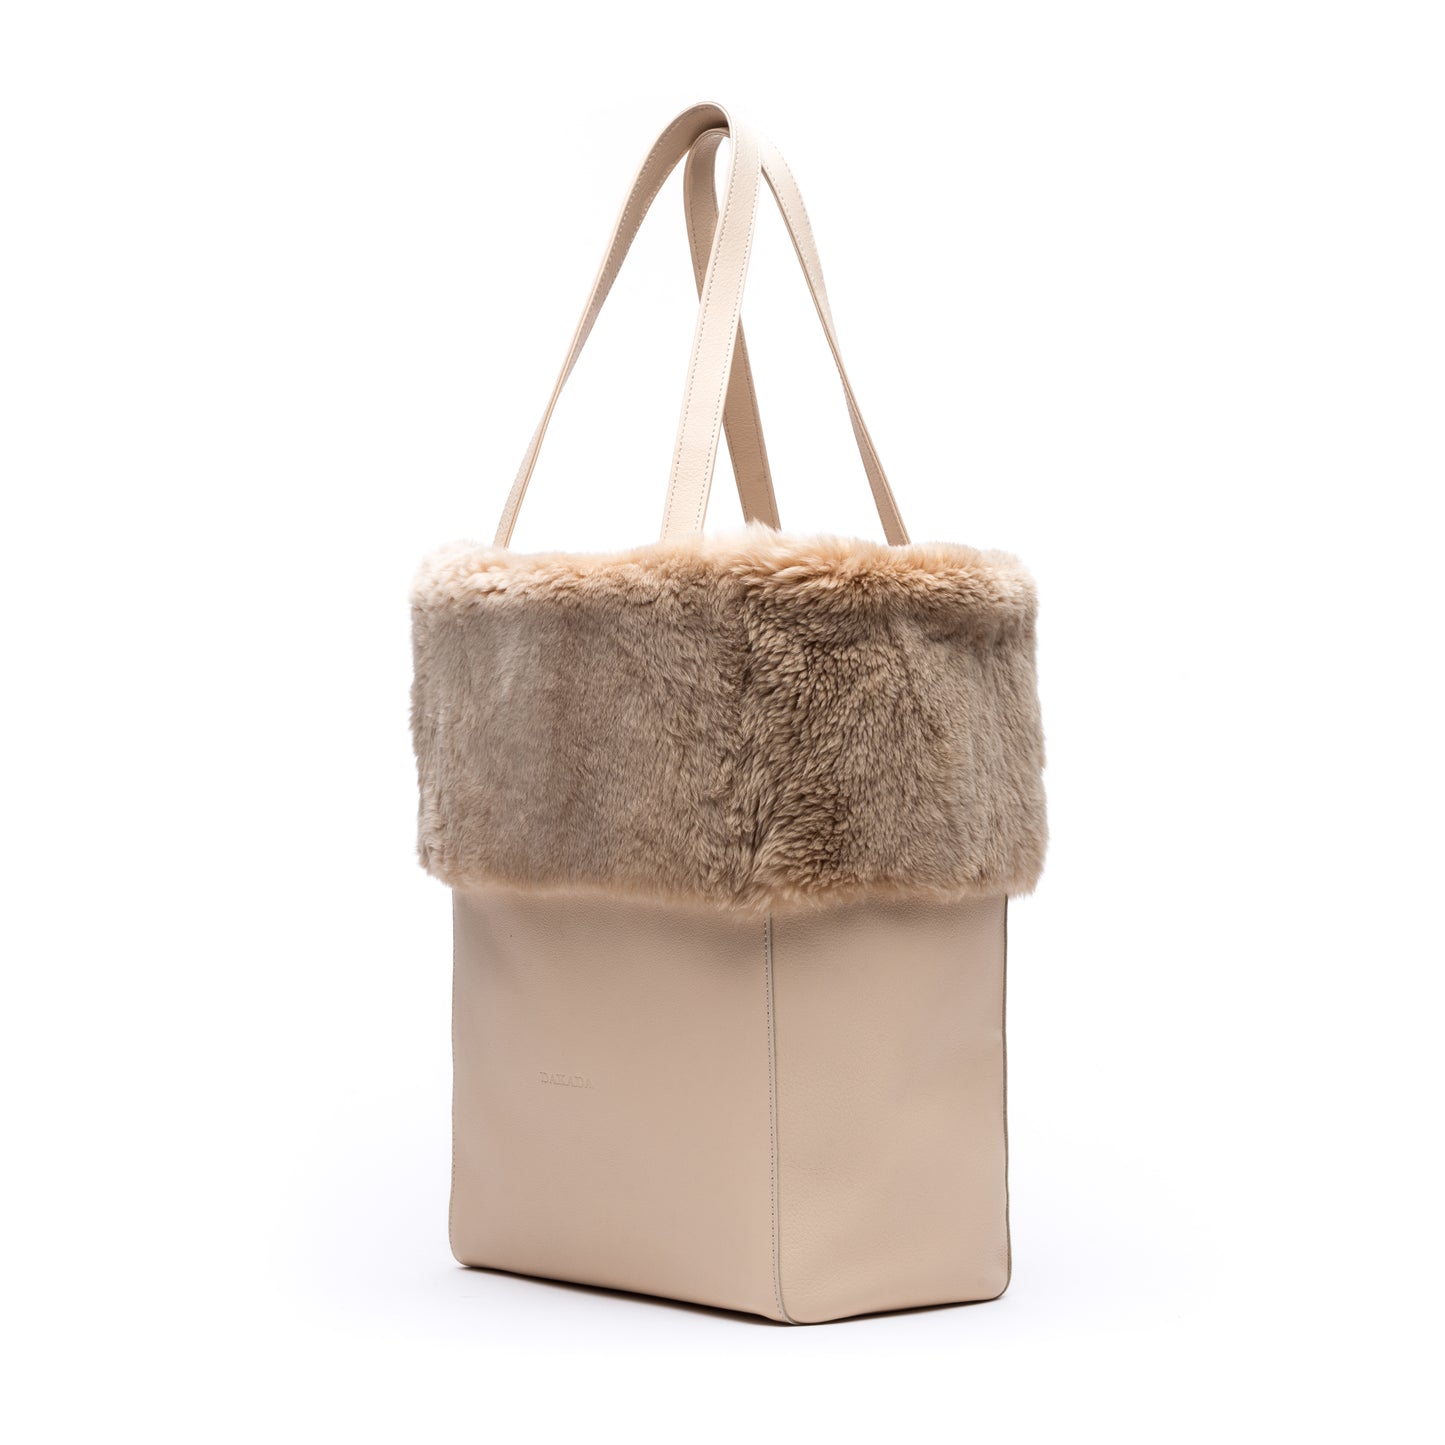 Kaley- Cream Leather Tote with Sheared Beaver